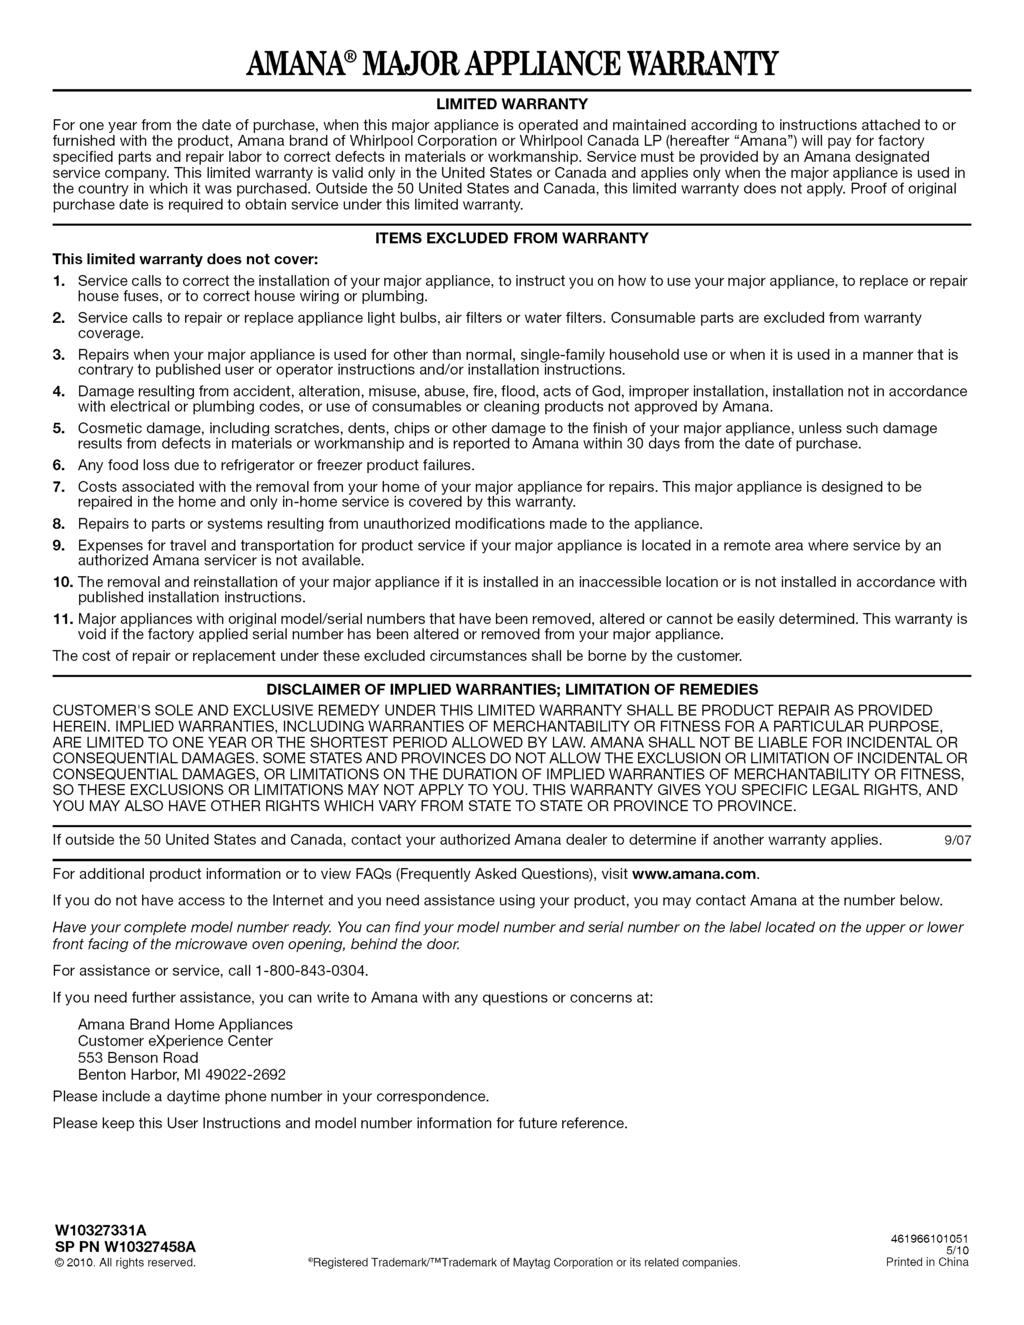 AMANA MAJORAPPLIANCEWARRANTY LIMITED WARRANTY For one year from the date of purchase, when this major appliance is operated and maintained according to instructions attached to or furnished with the